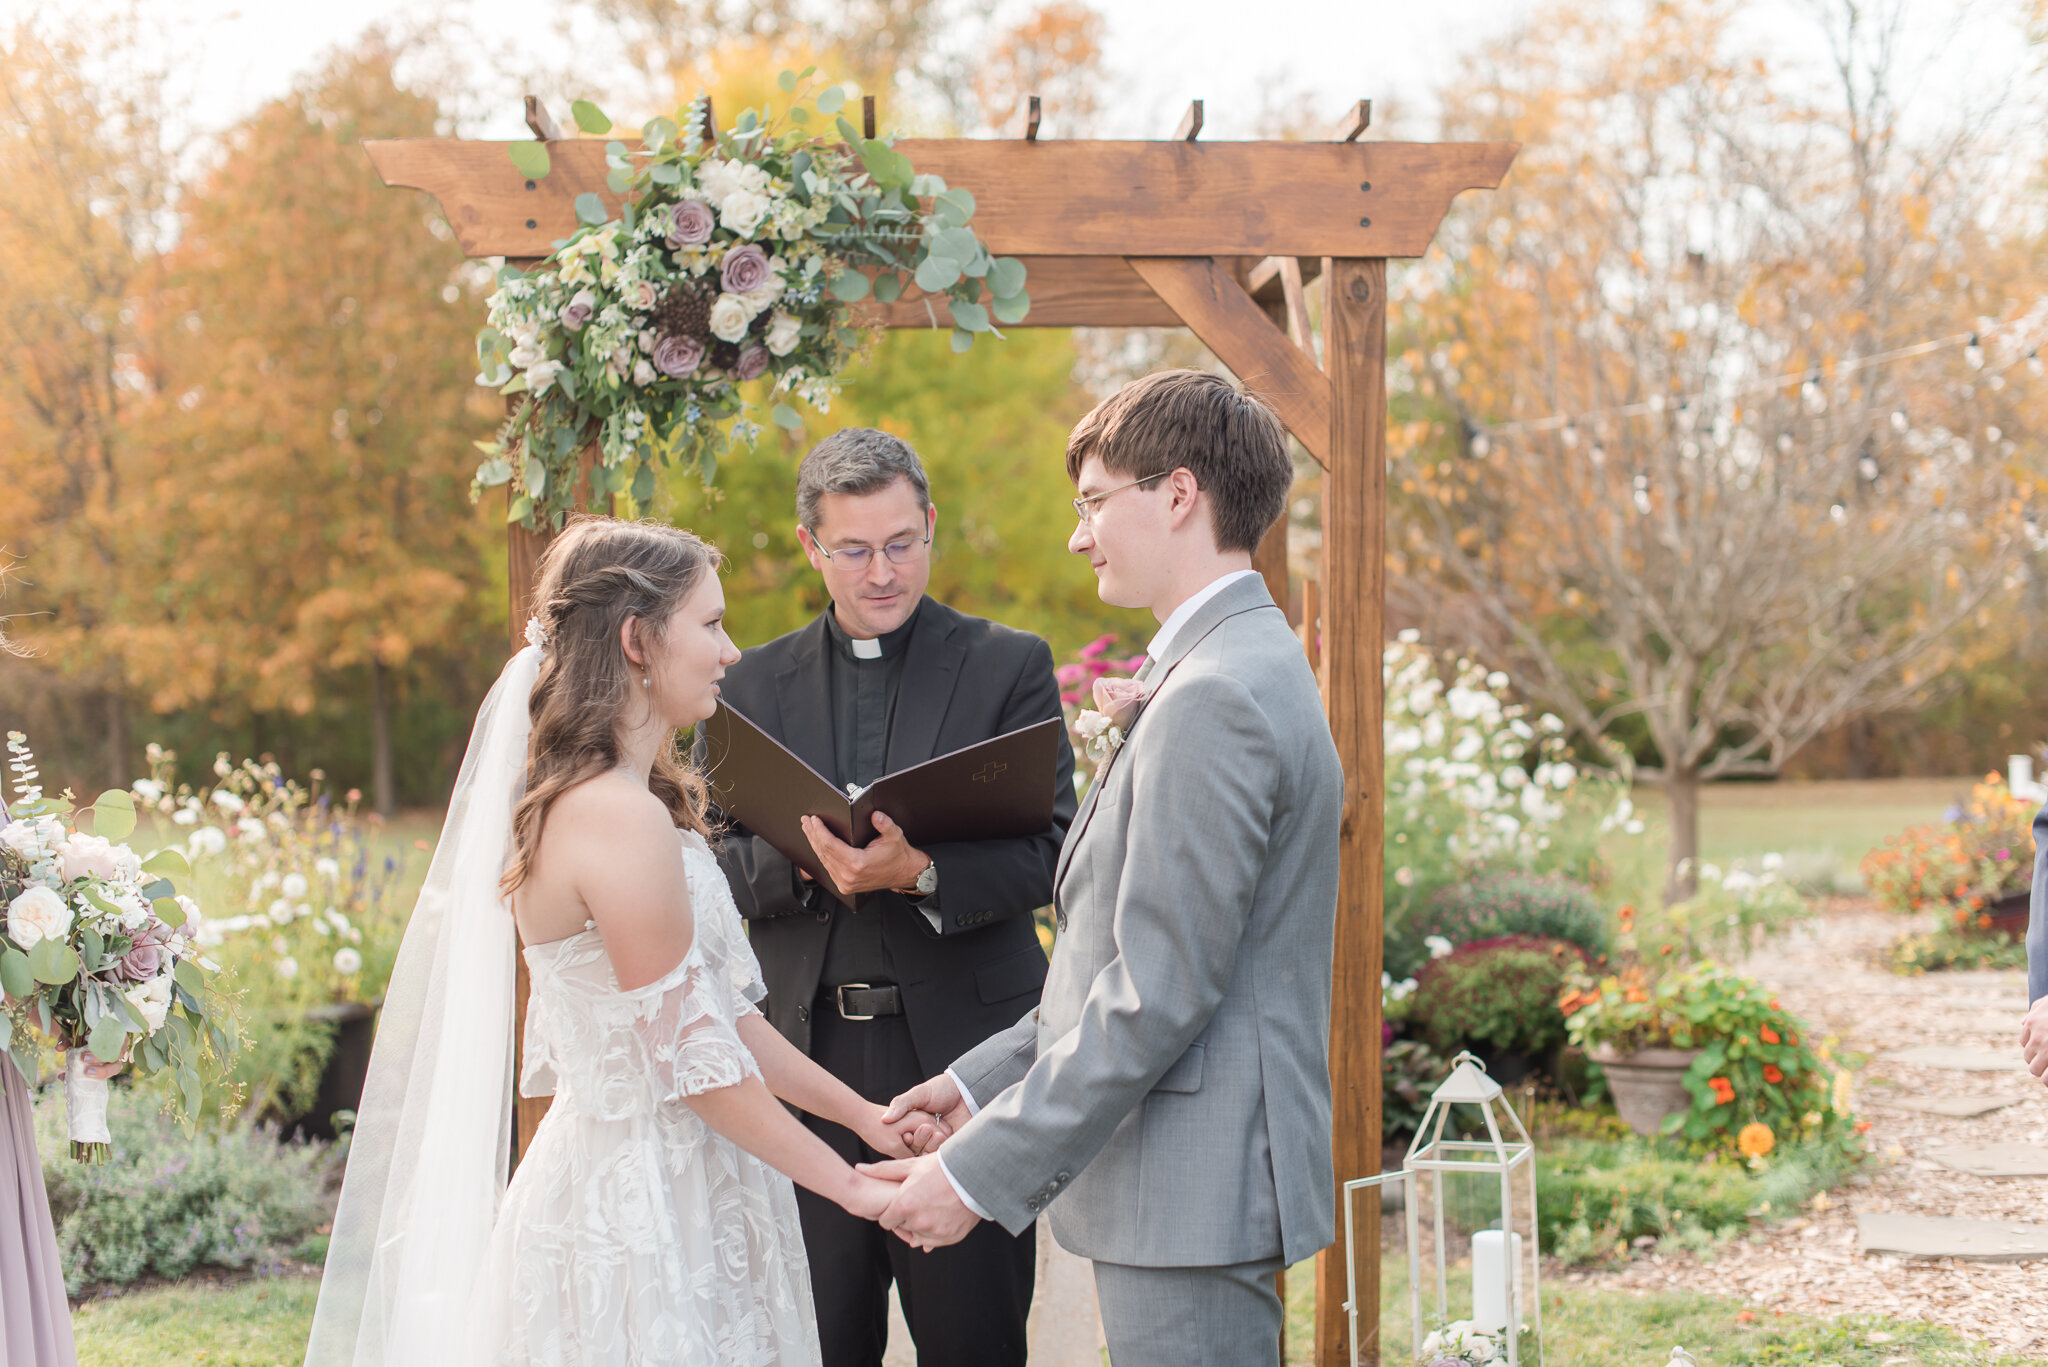 Covid Elopement In Indiana6778.jpg